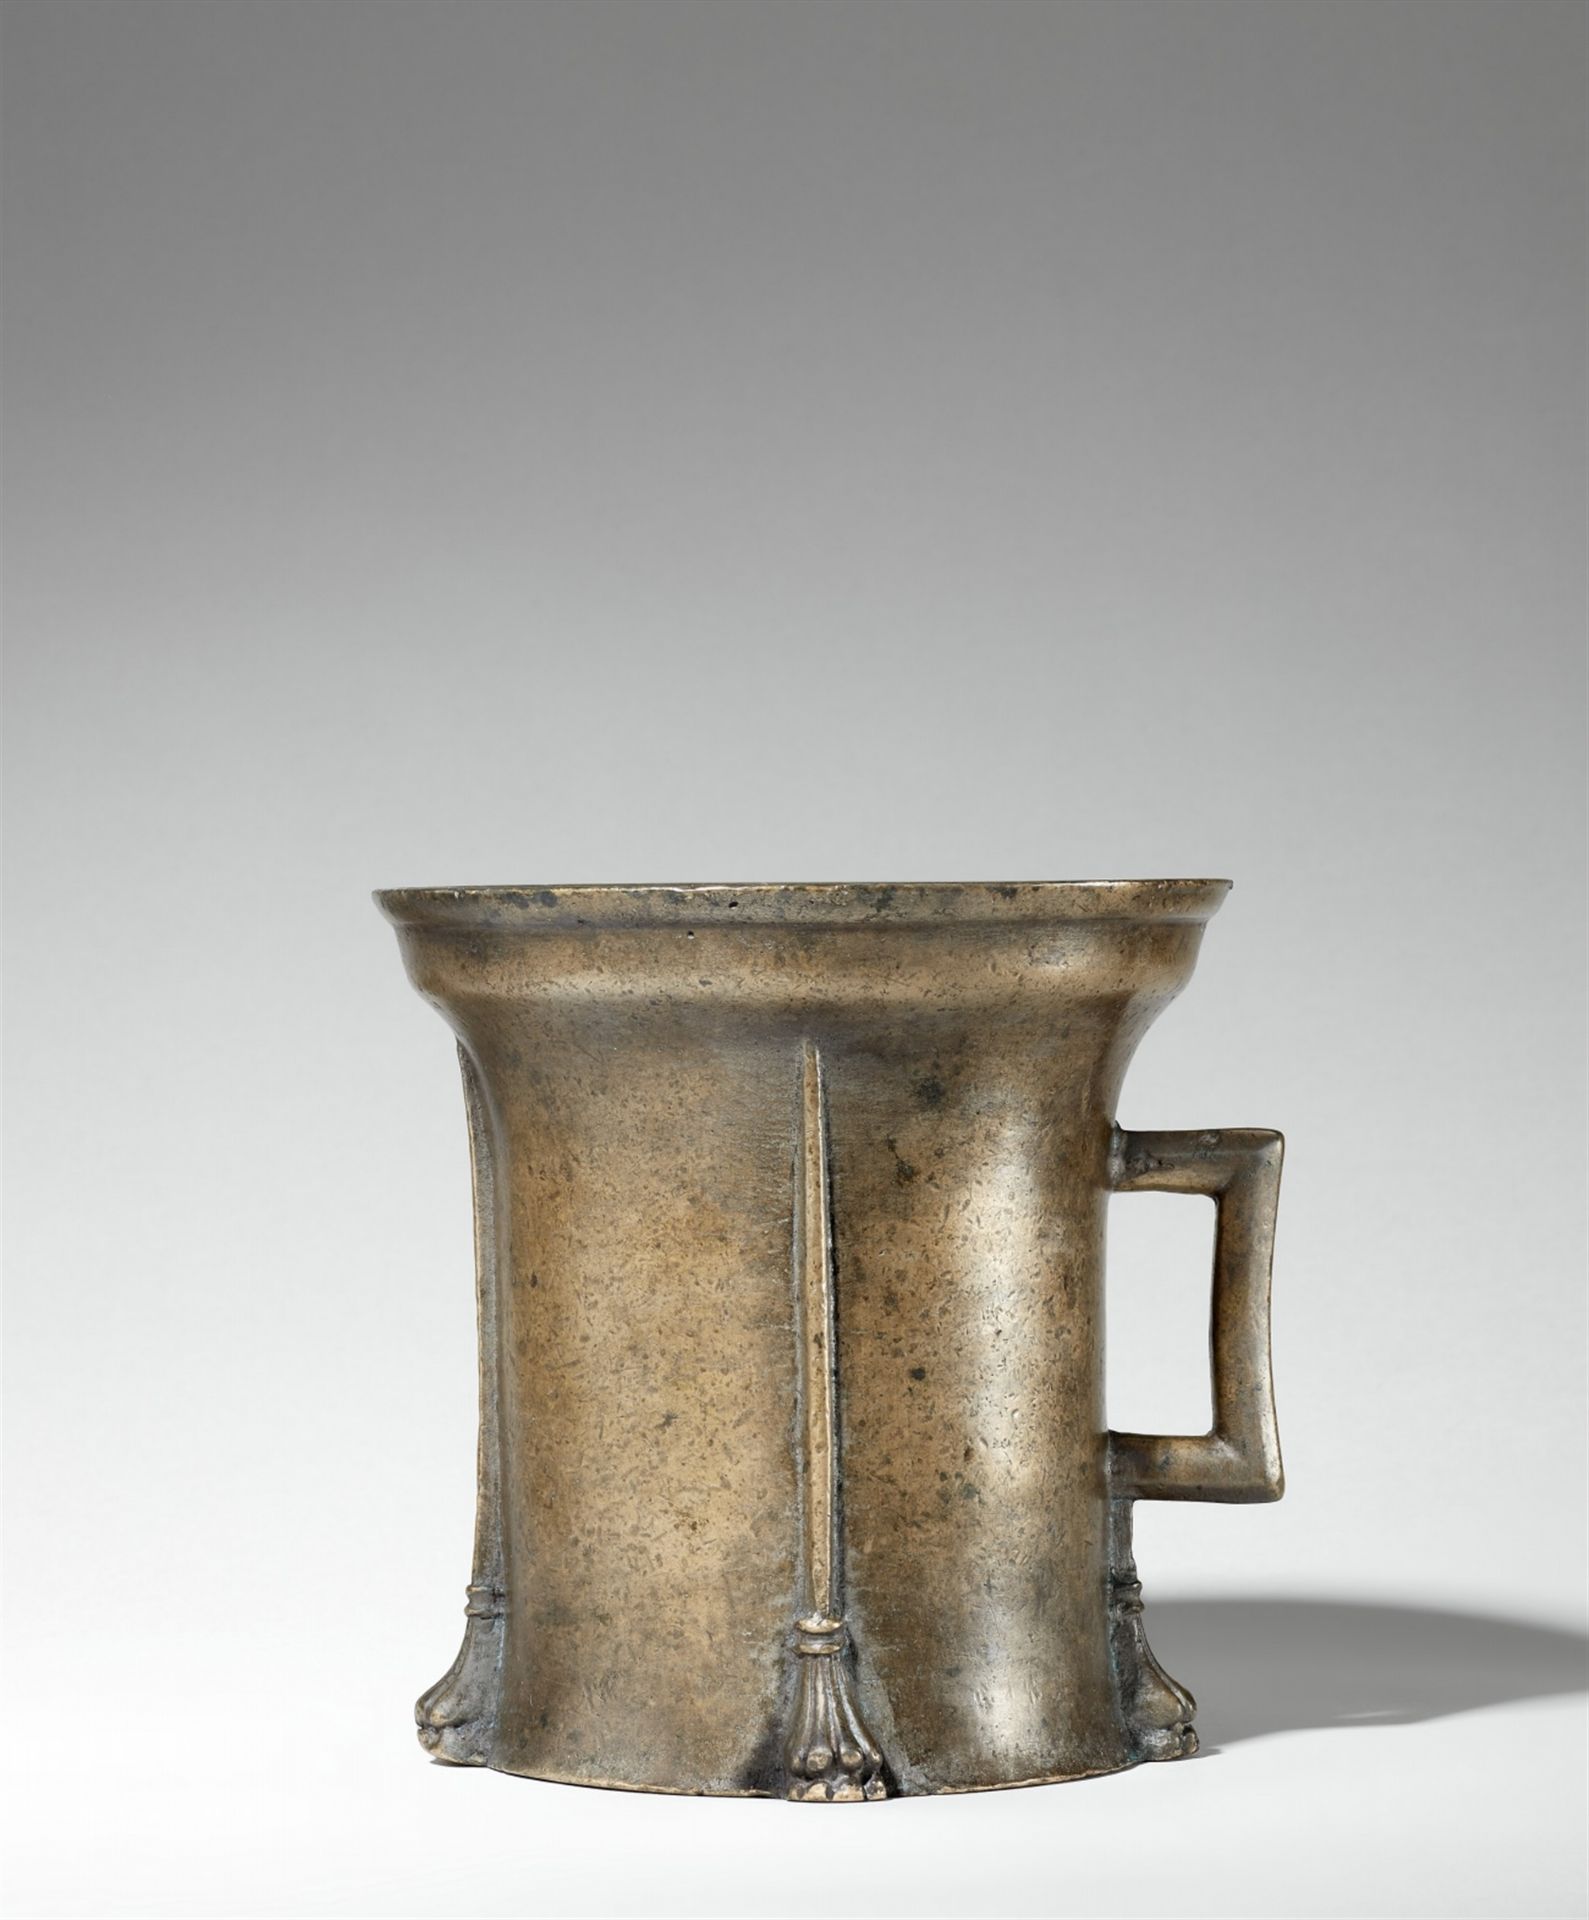 A magnificent Gothic single-handled mortar with lion's paw feet